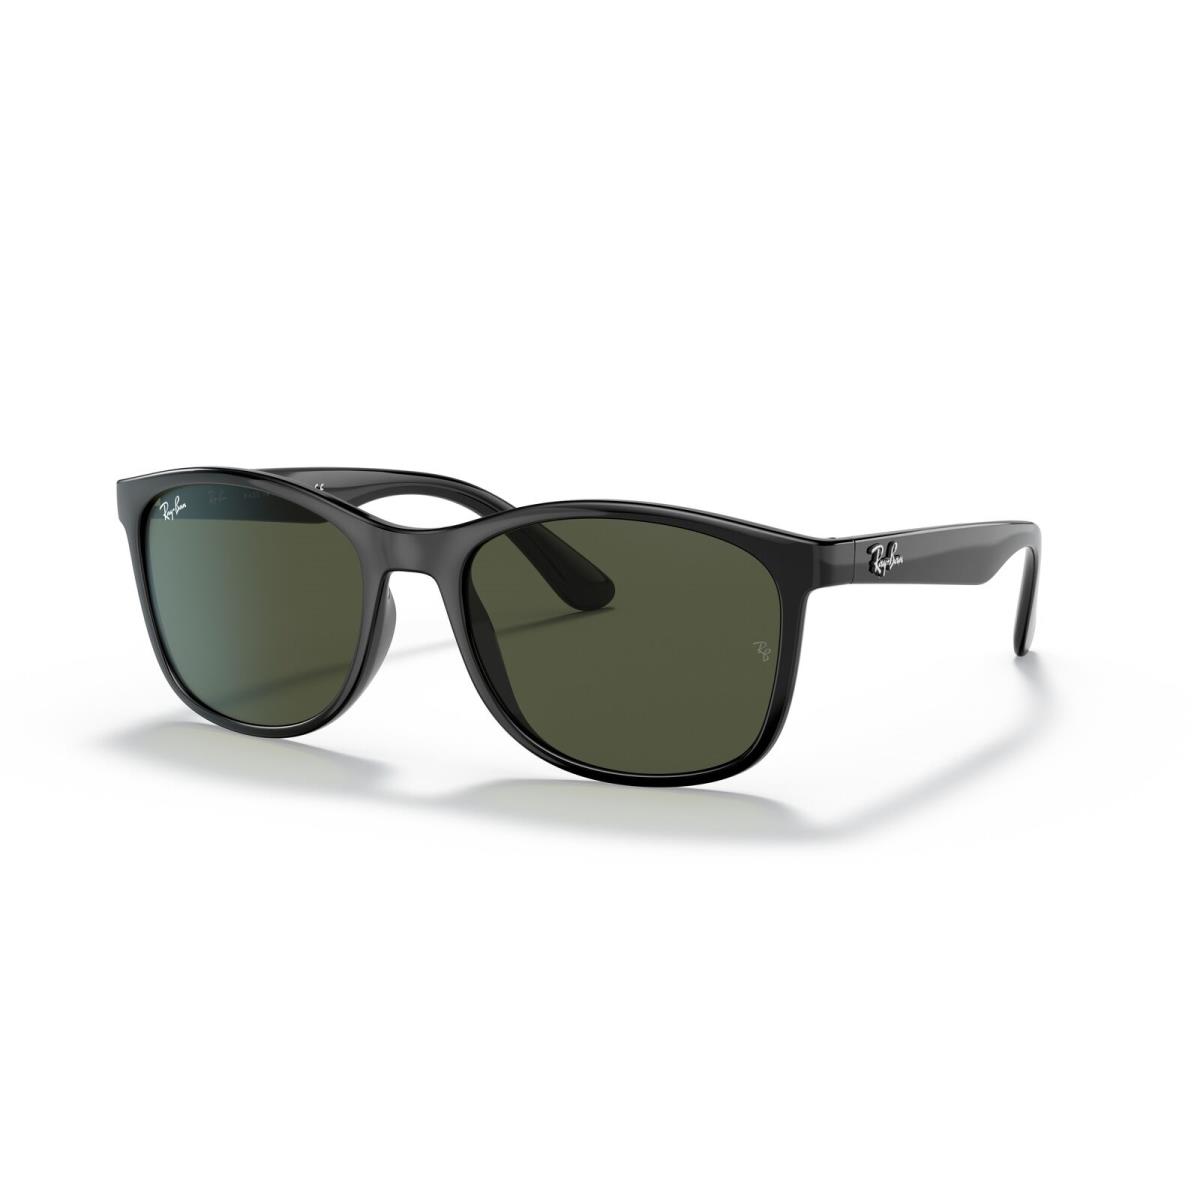 Ray-ban 0RB4374F 601/31 Green Square Sunglasses